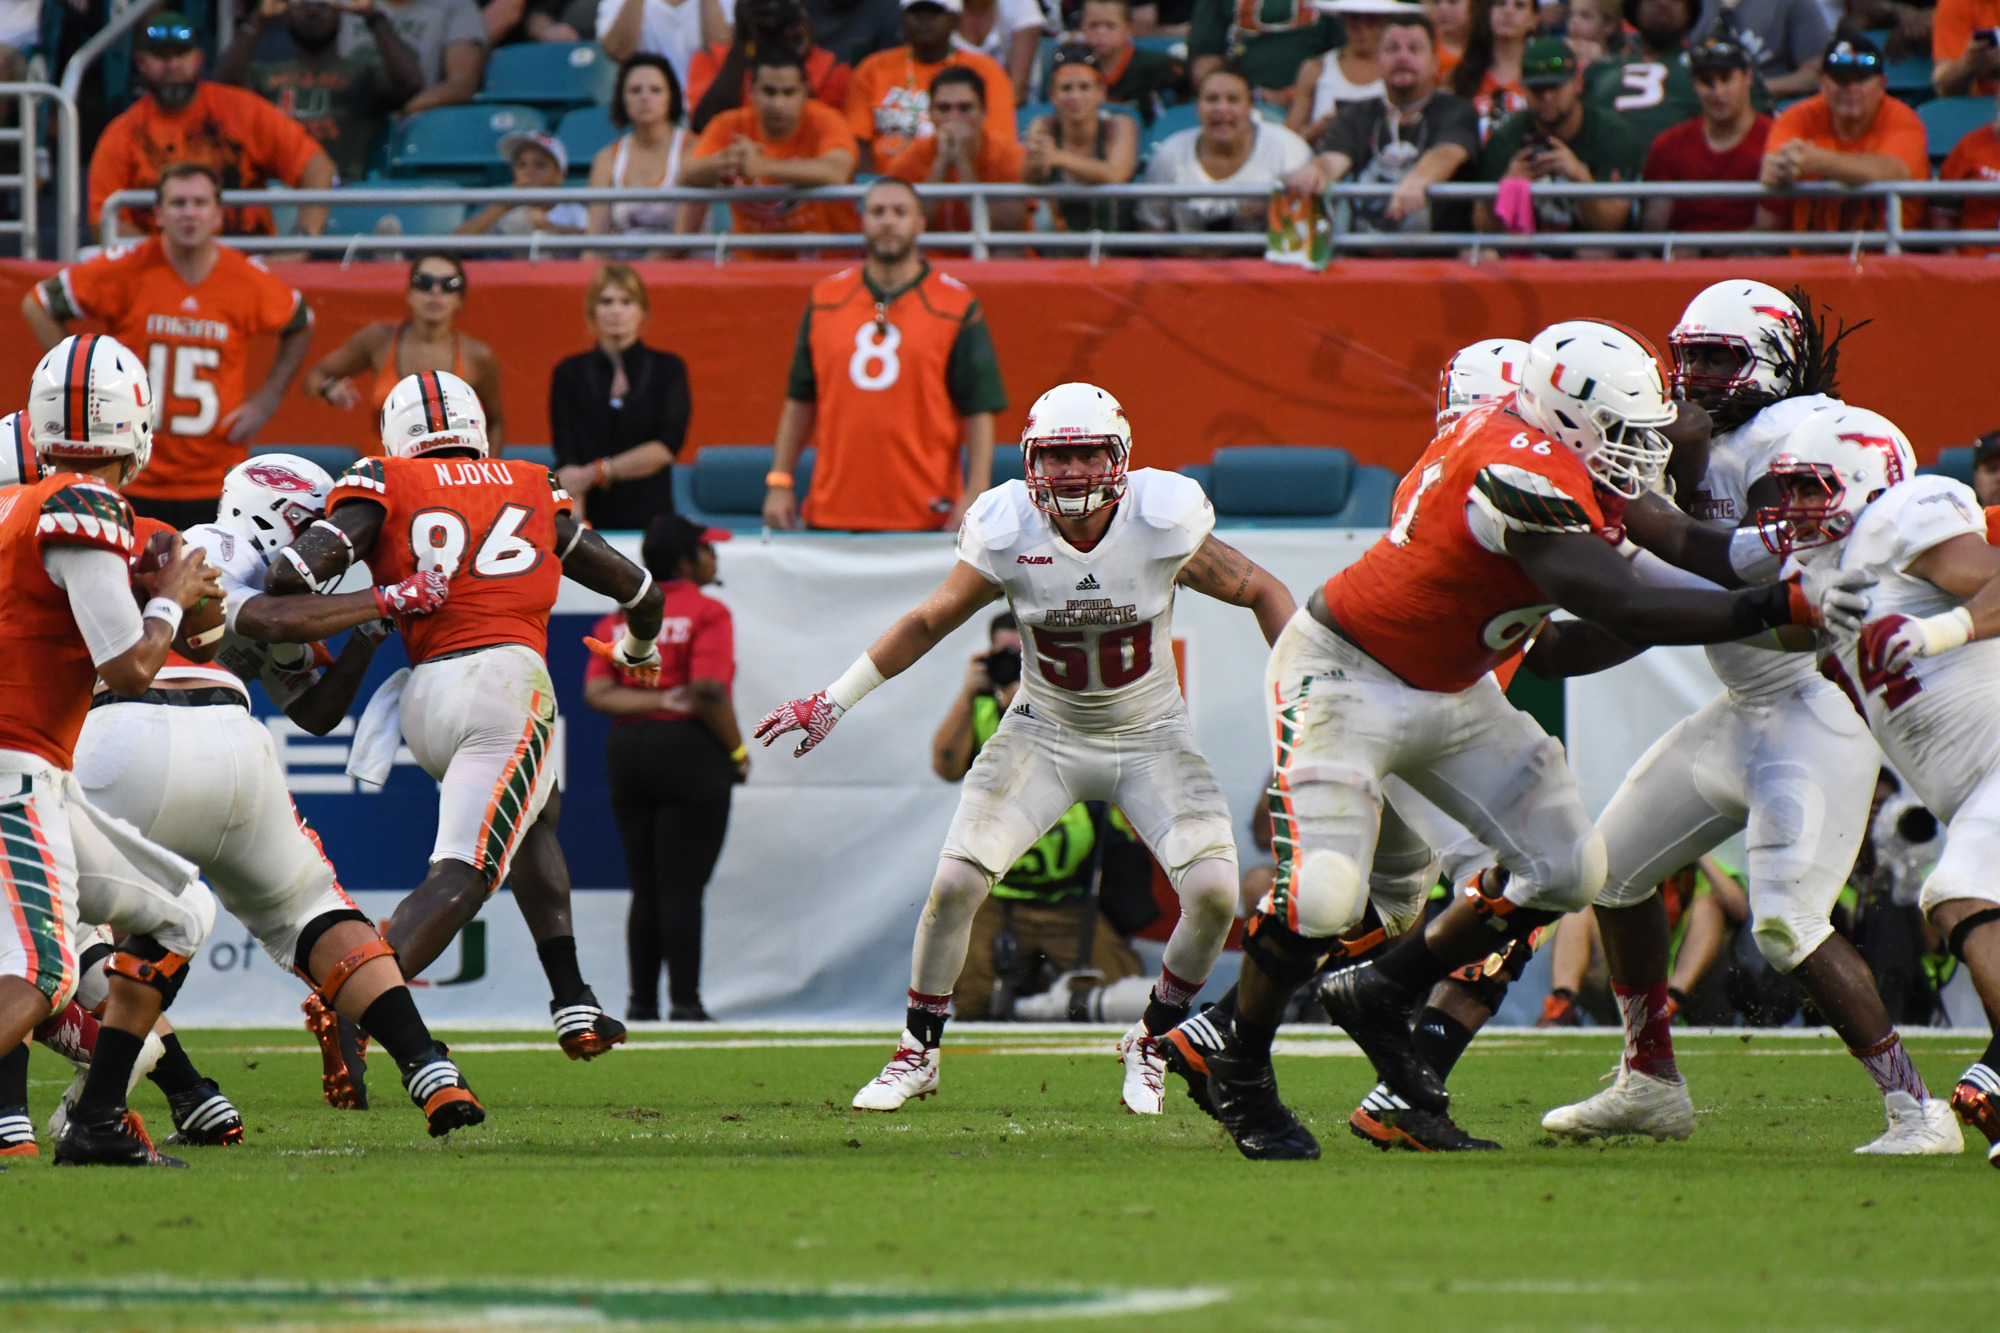 Nate Ozdemir had the only interception of his career come against the Miami Hurricanes. Courtesy photo